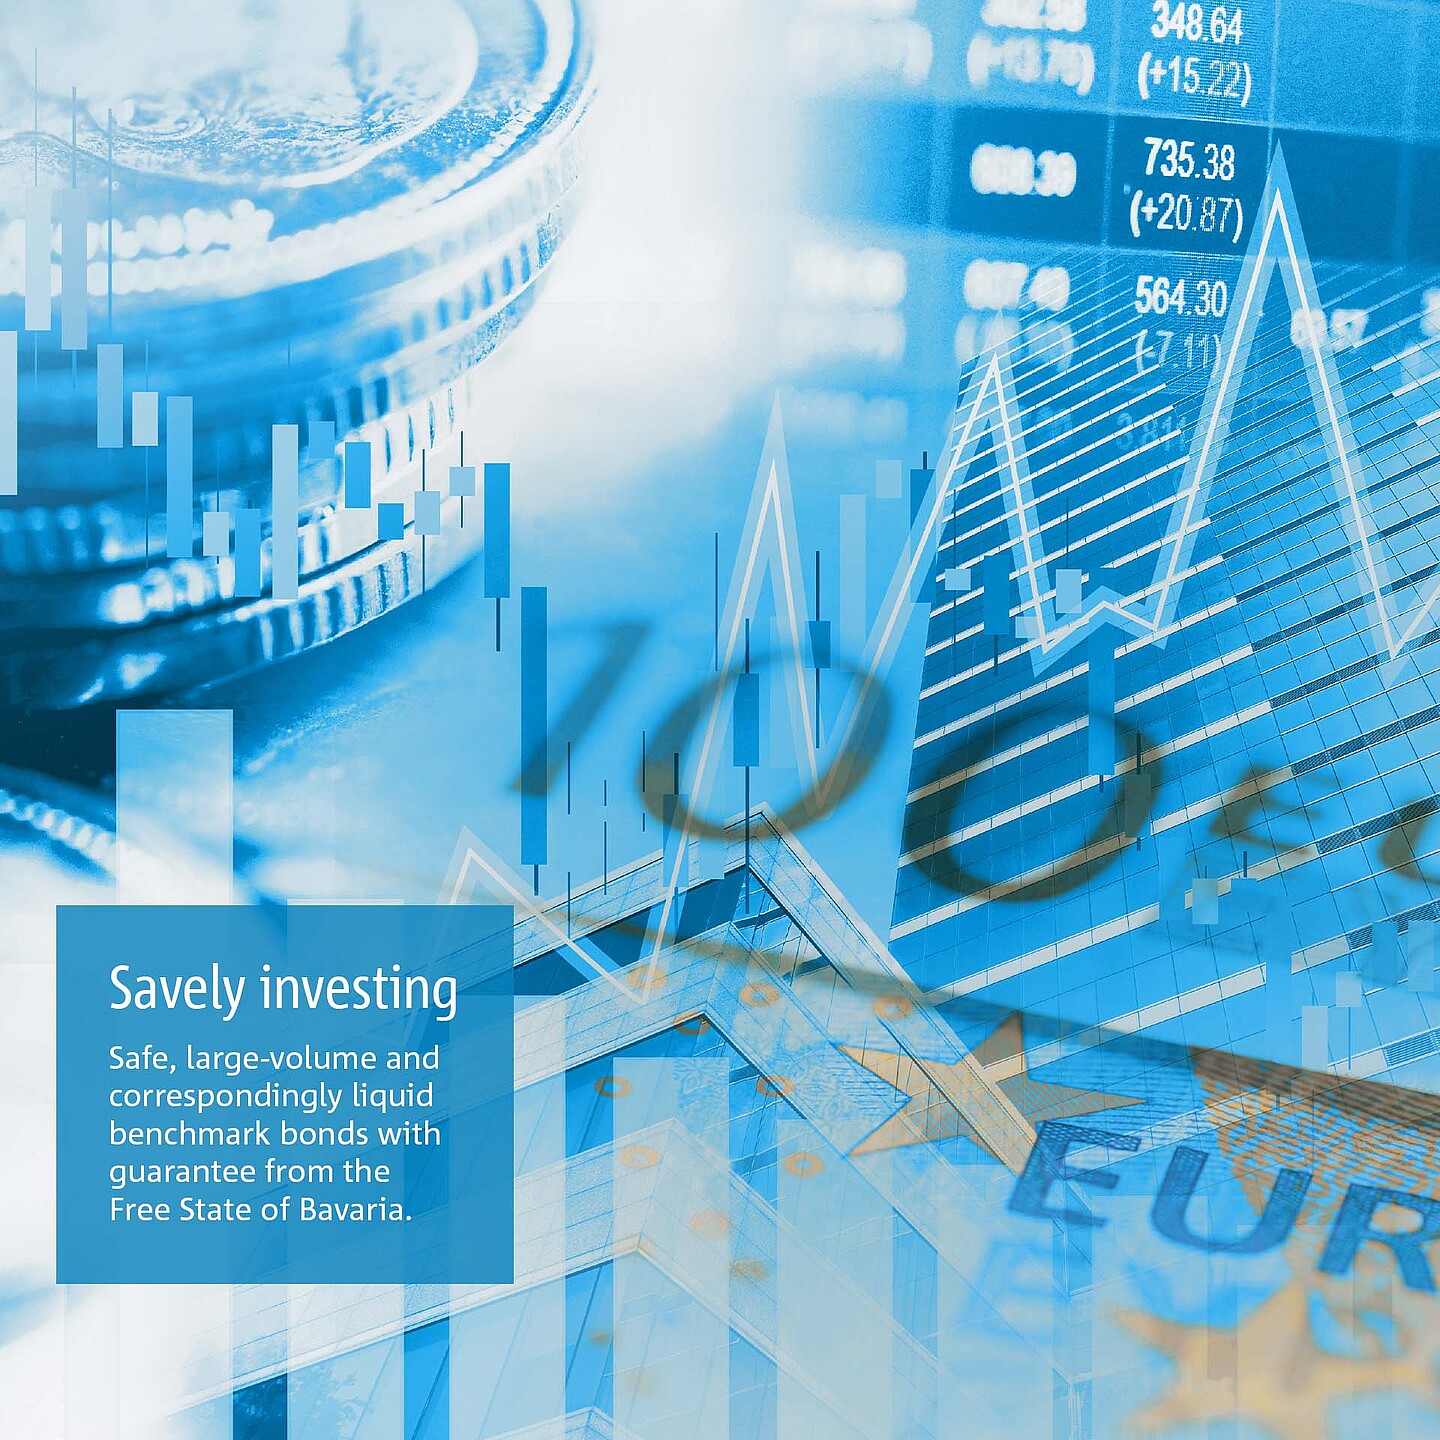 Invest liquid funds securely with Investor Relations from BayernLabo.